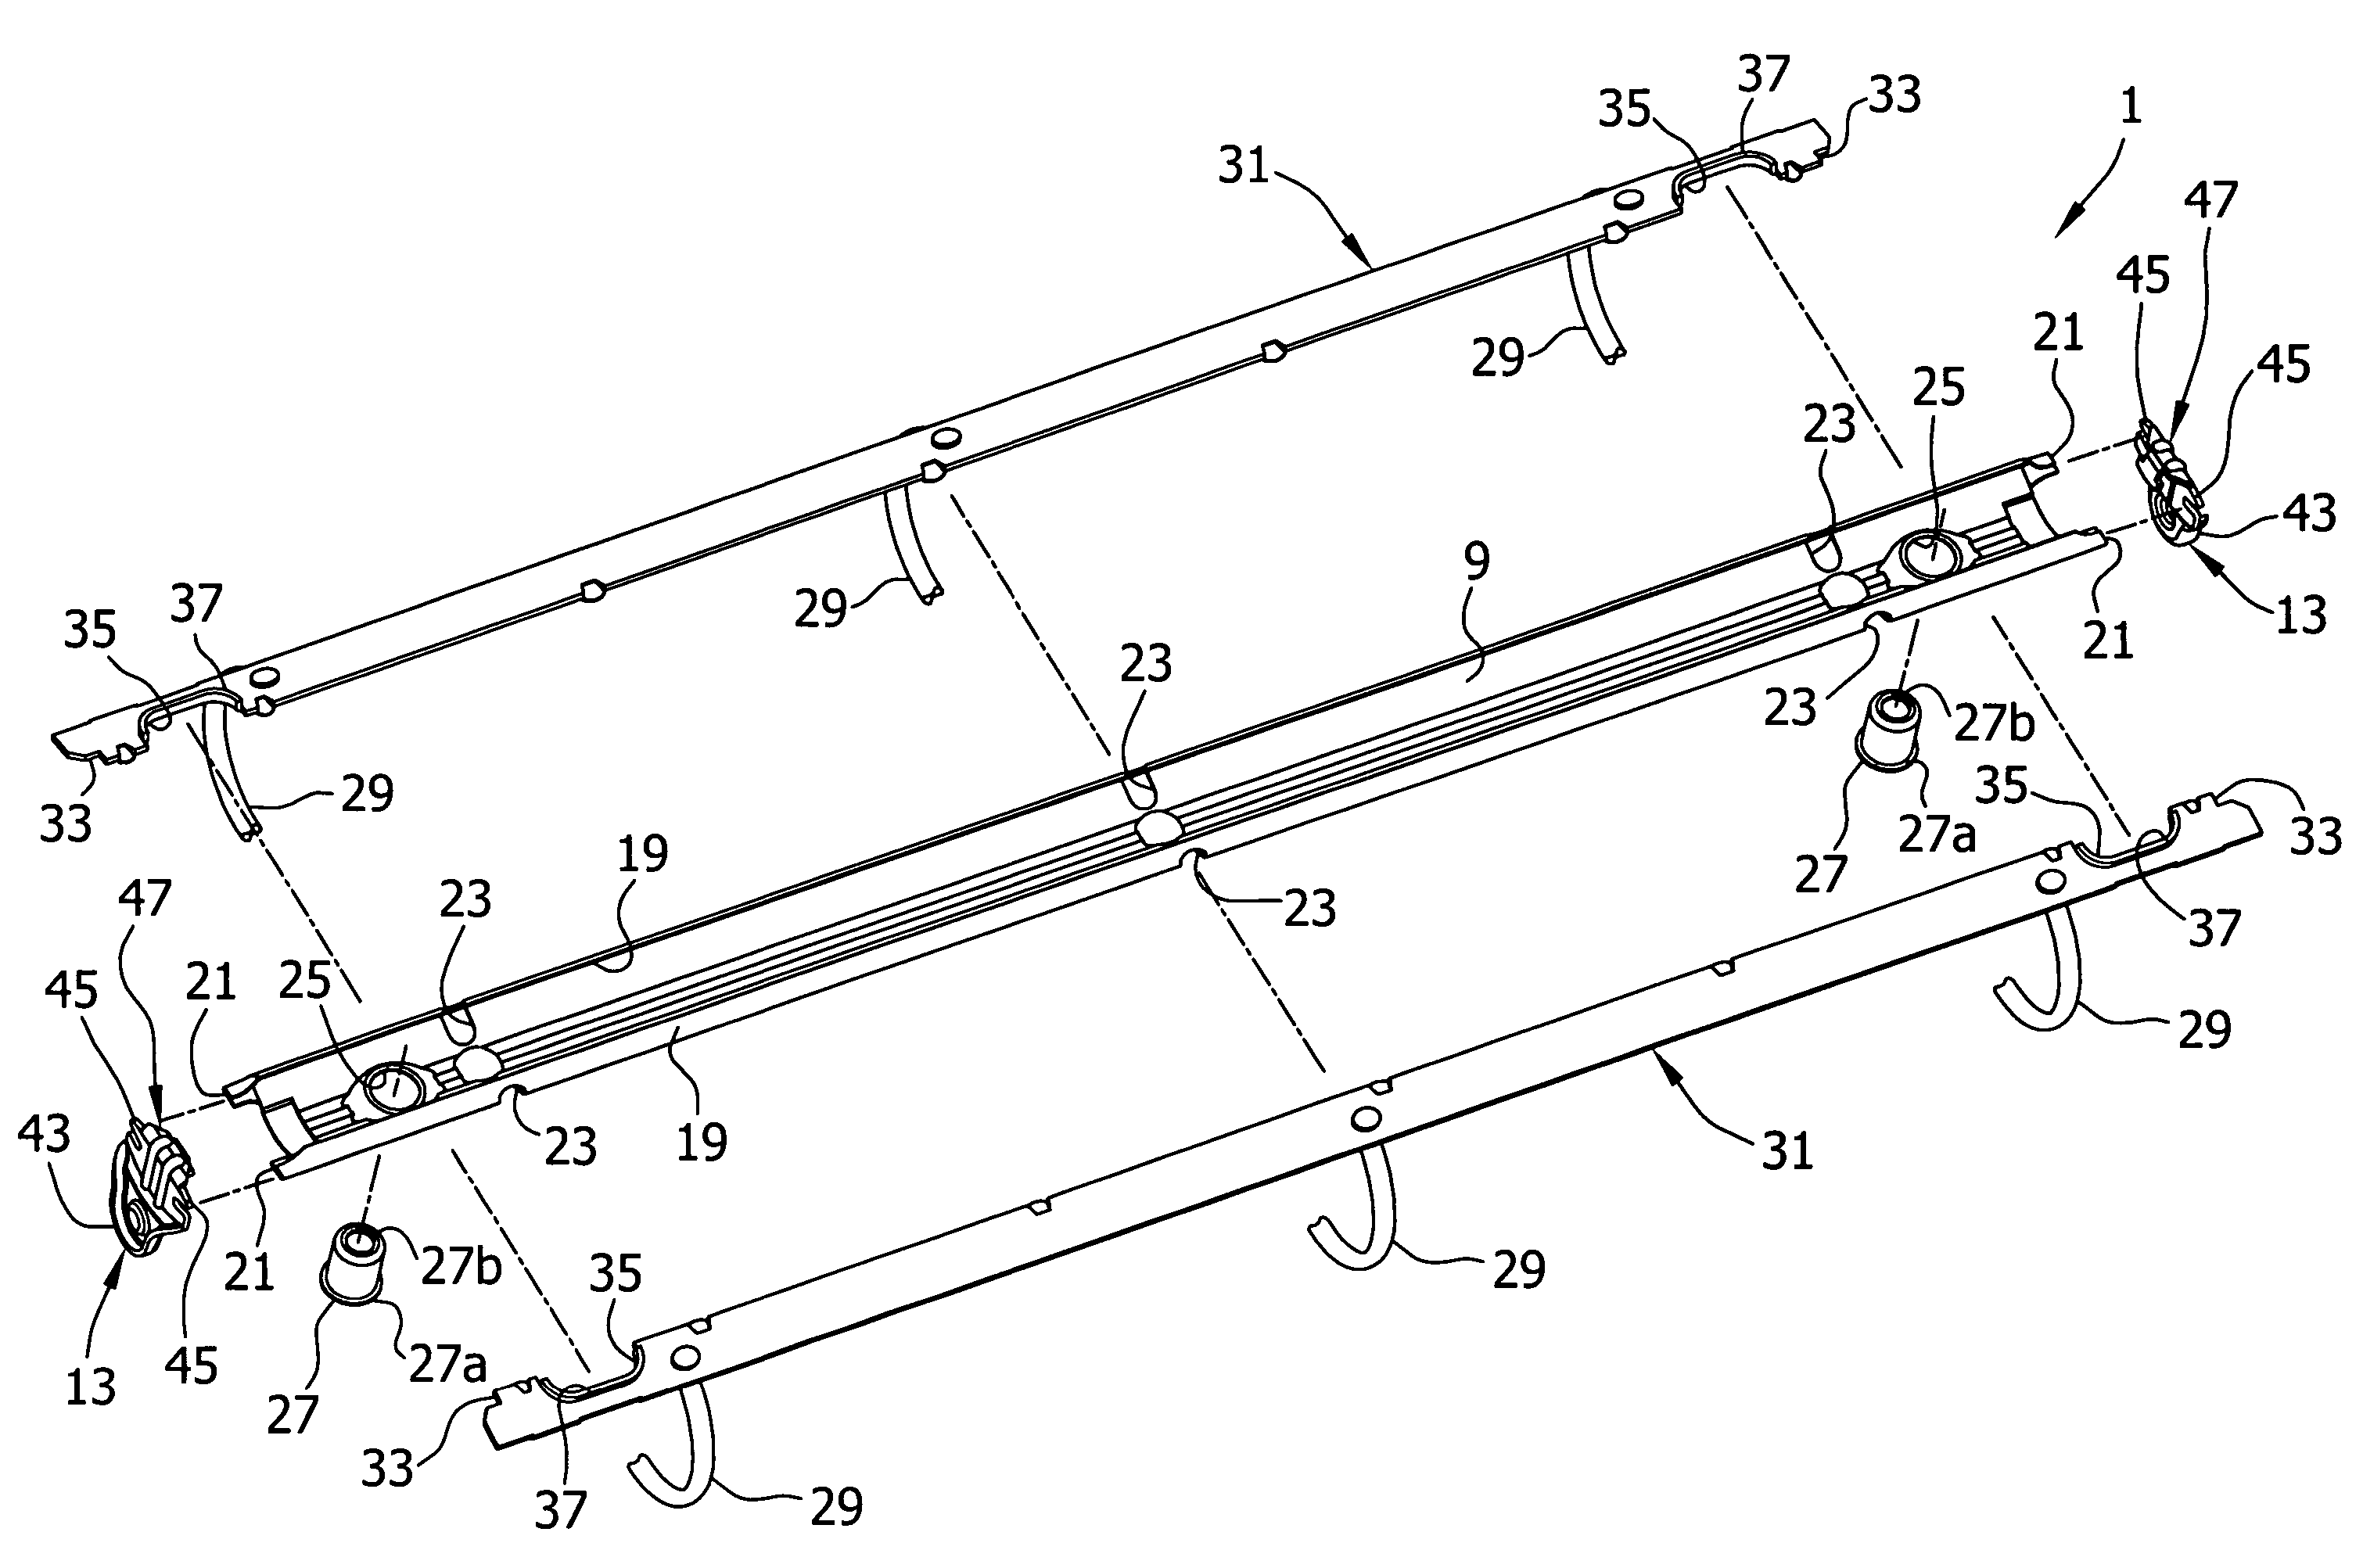 Ring binder mechanism with reinforced hinge plates